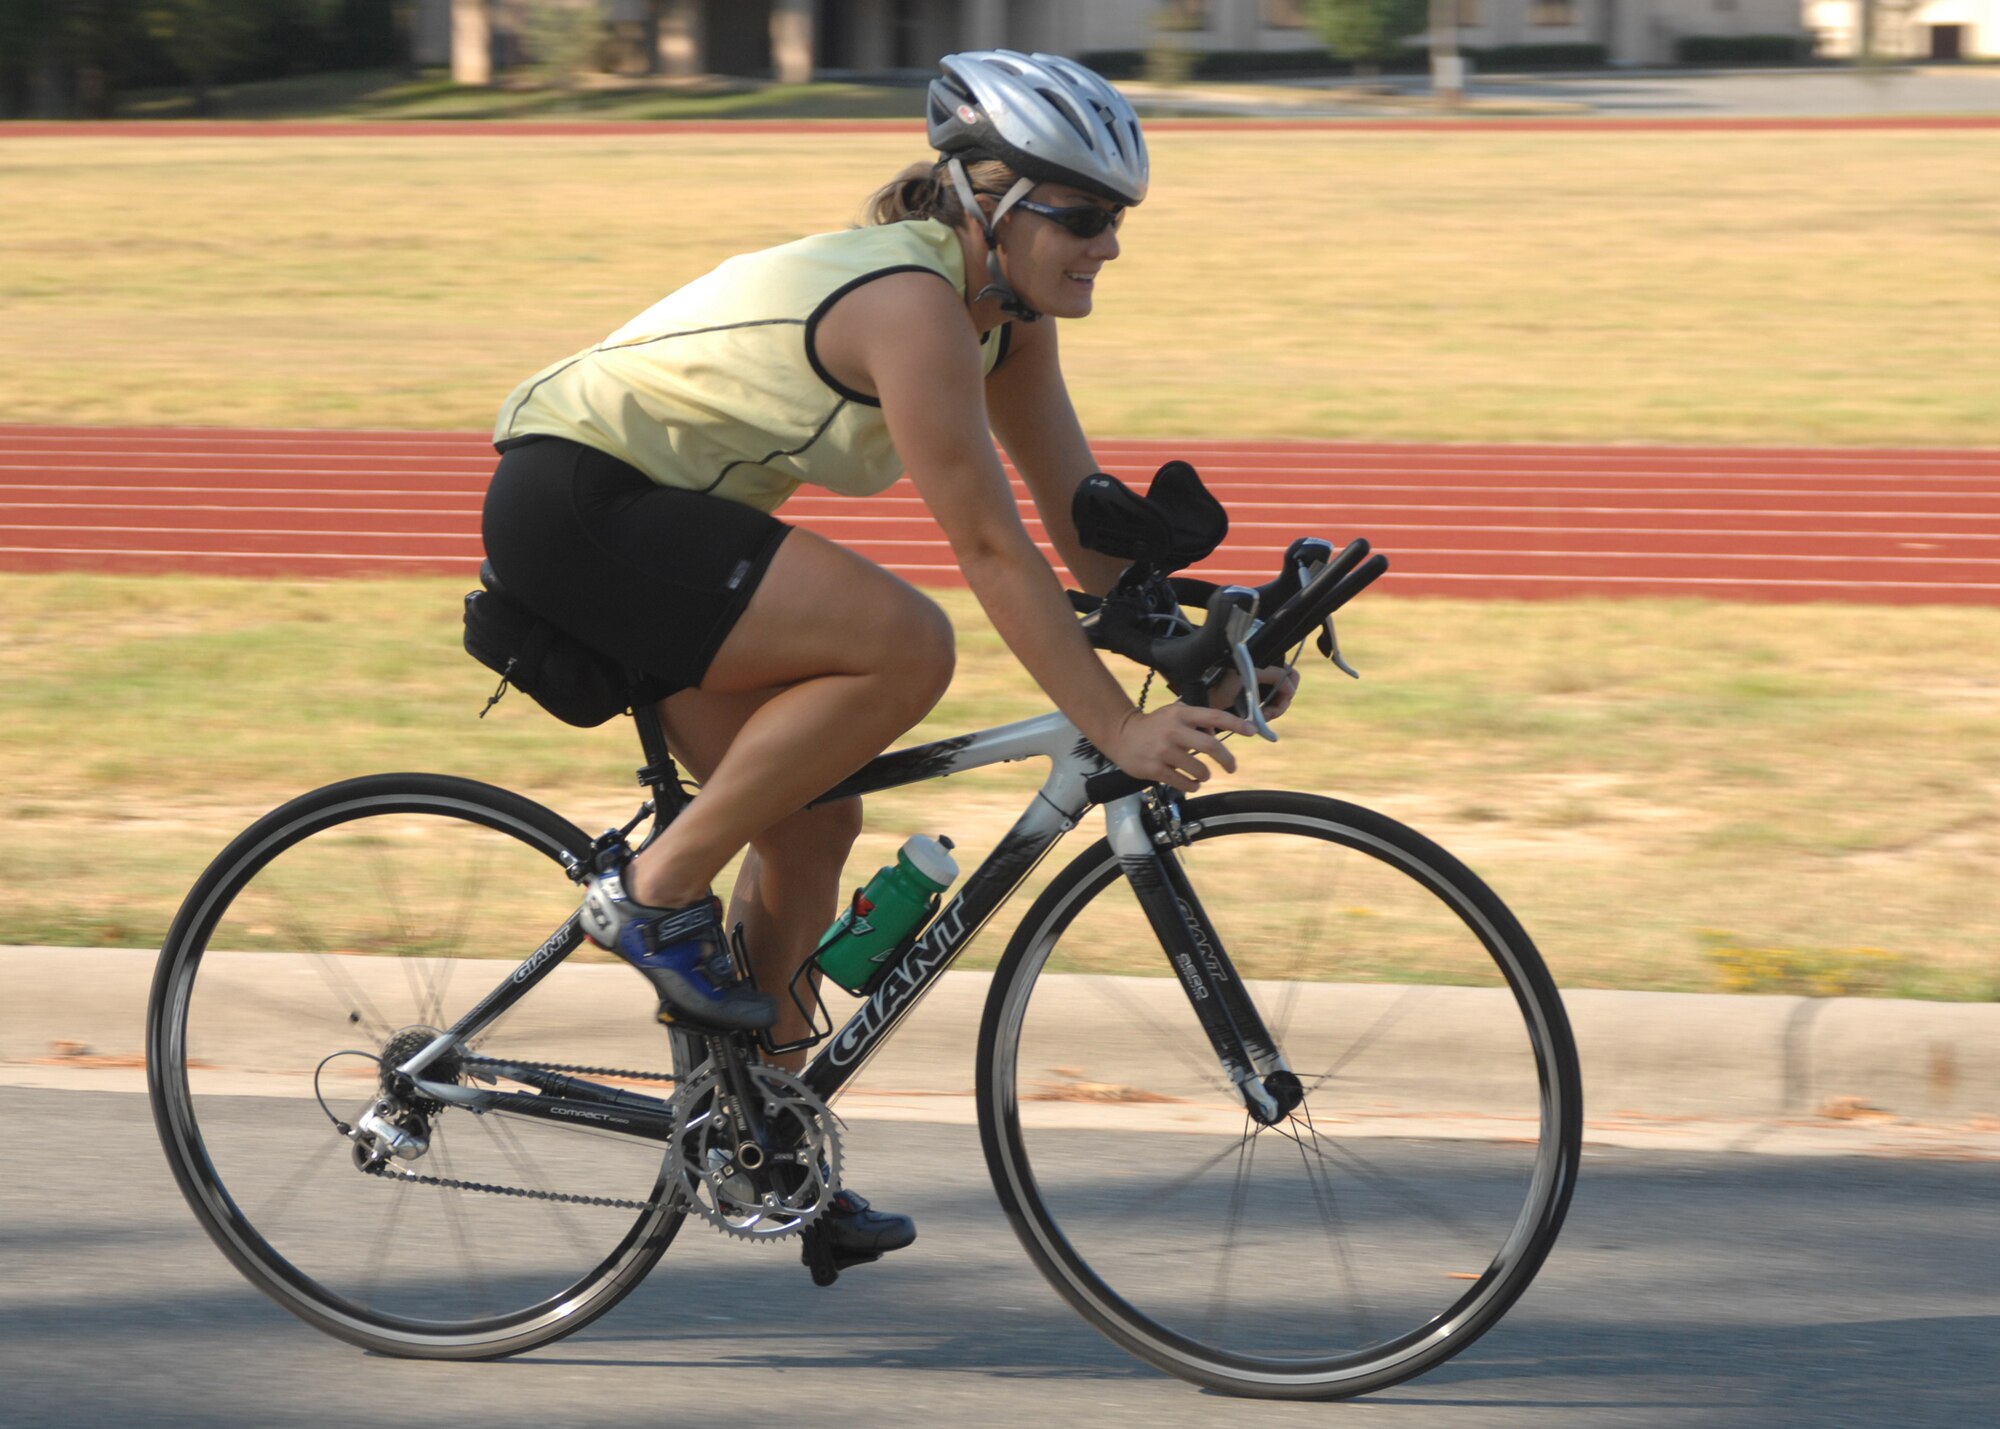 SEYMOUR JOHNSON AIR FORCE BASE, N.C. - Diane Giefer finishes up the bike portion of the triathlon race.  The race, which consisted of lap swimming, a 15 mile bike ride, and a 4 mile run was hosted by the 4th Services Squadron September 8, 2007. (U.S. Air Force photo by Senior Airman Chad Trujillo)